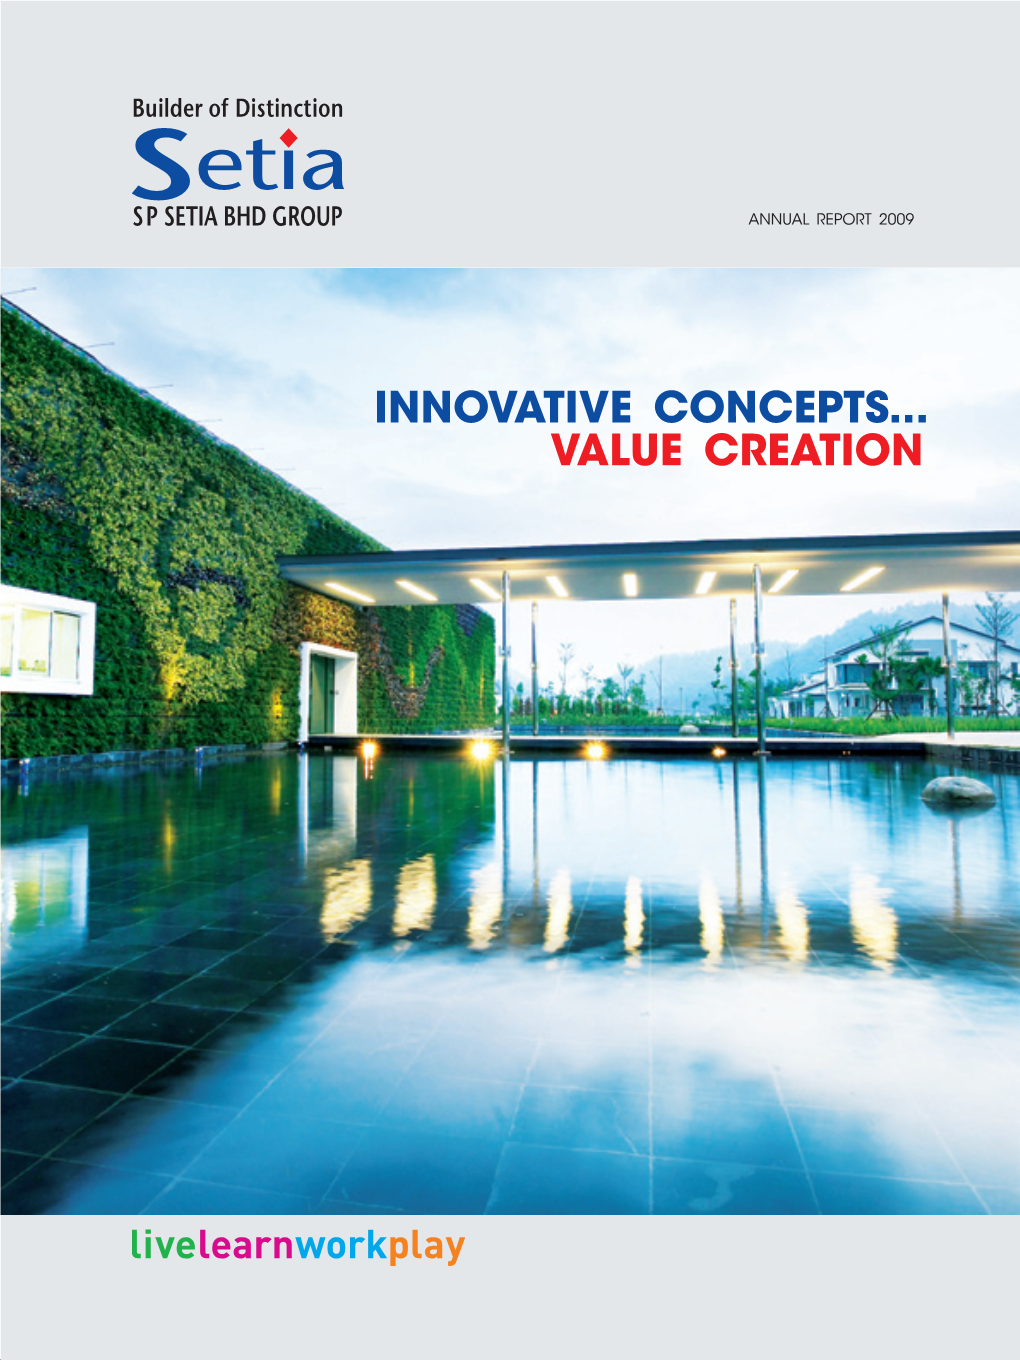 Innovative Concepts... Value Creation the Setia Eco Gardens Sales Gallery Beckons One to Take a Second Look